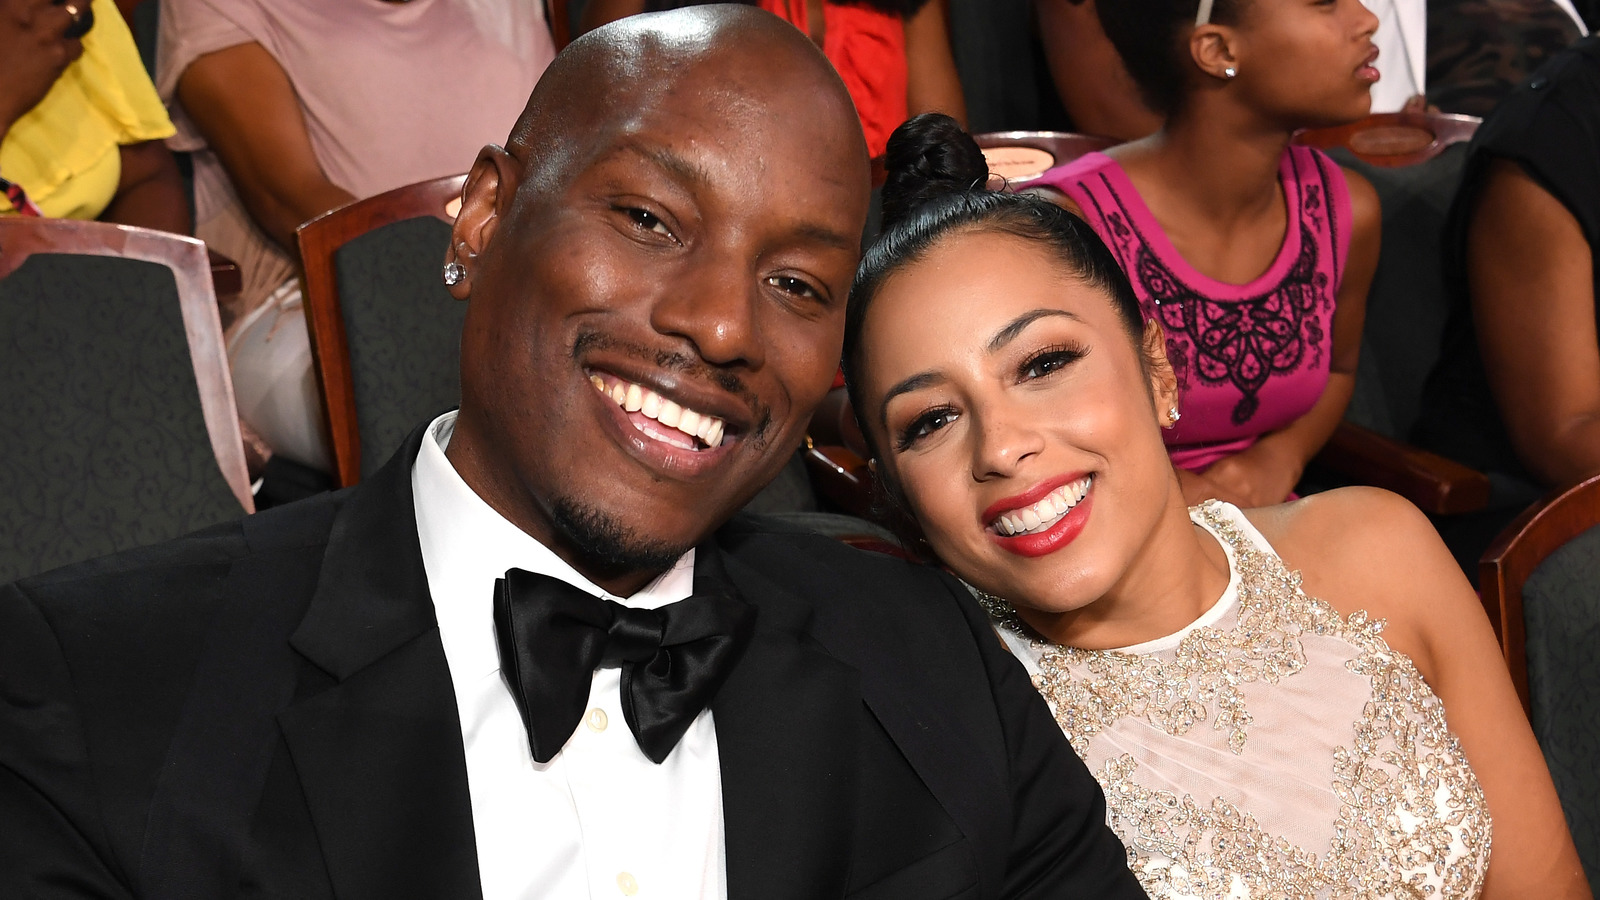 Tyrese ordered to pay $10K a month in child support